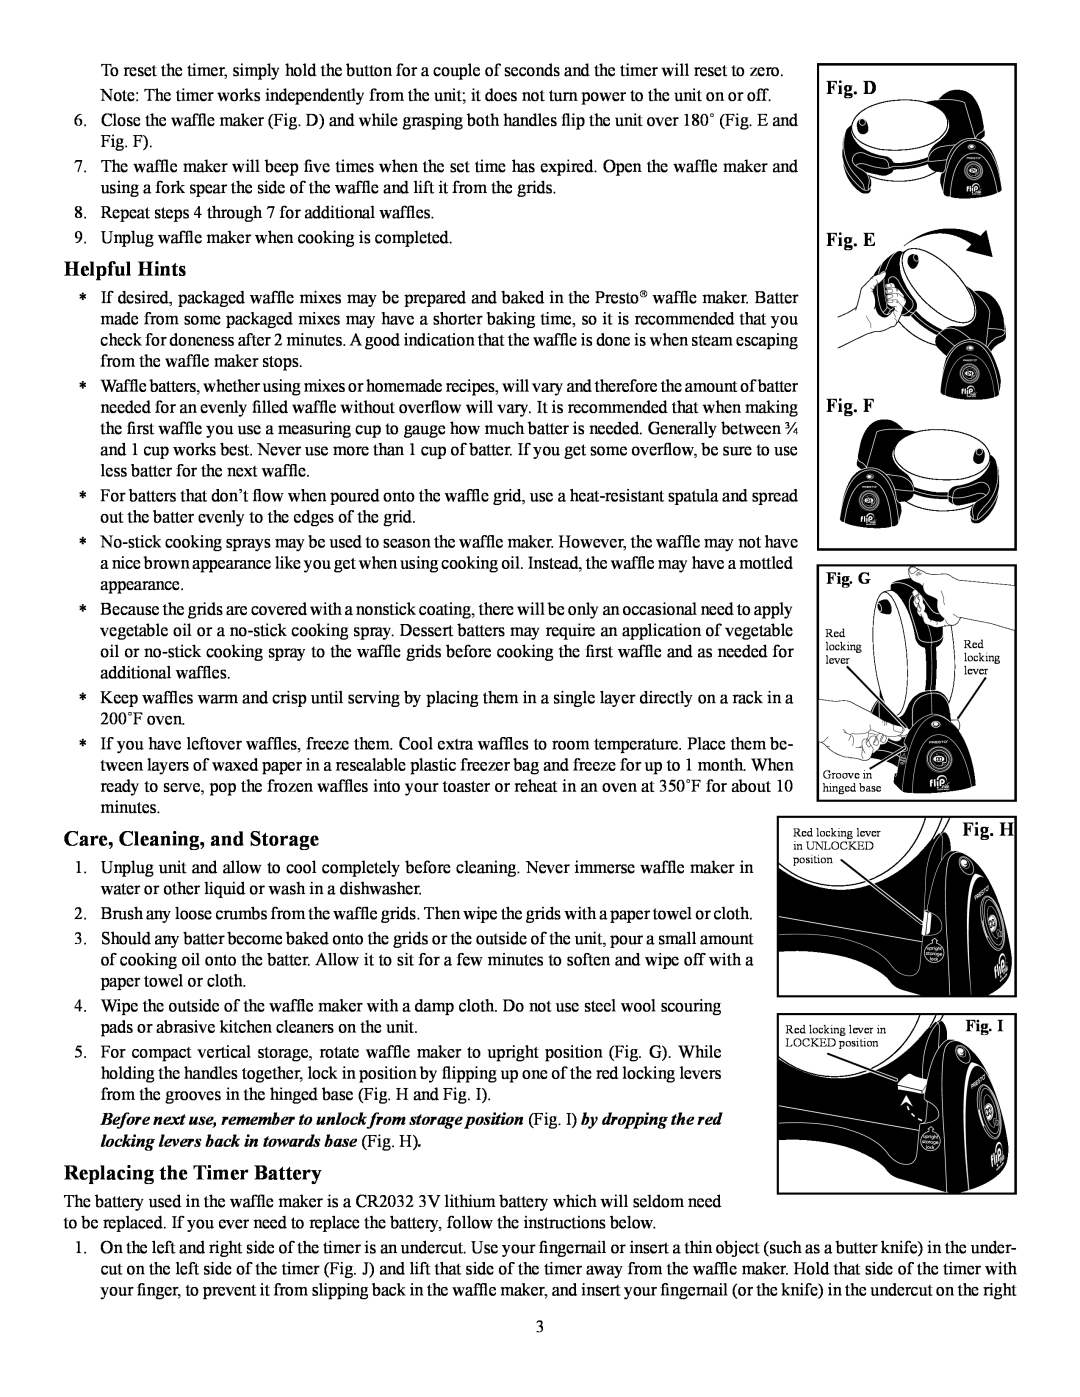 Presto P3510 manual Helpful Hints, Care, Cleaning, and Storage, Replacing the Timer Battery, Fig. D, Fig. E, Fig. F, Fig. H 